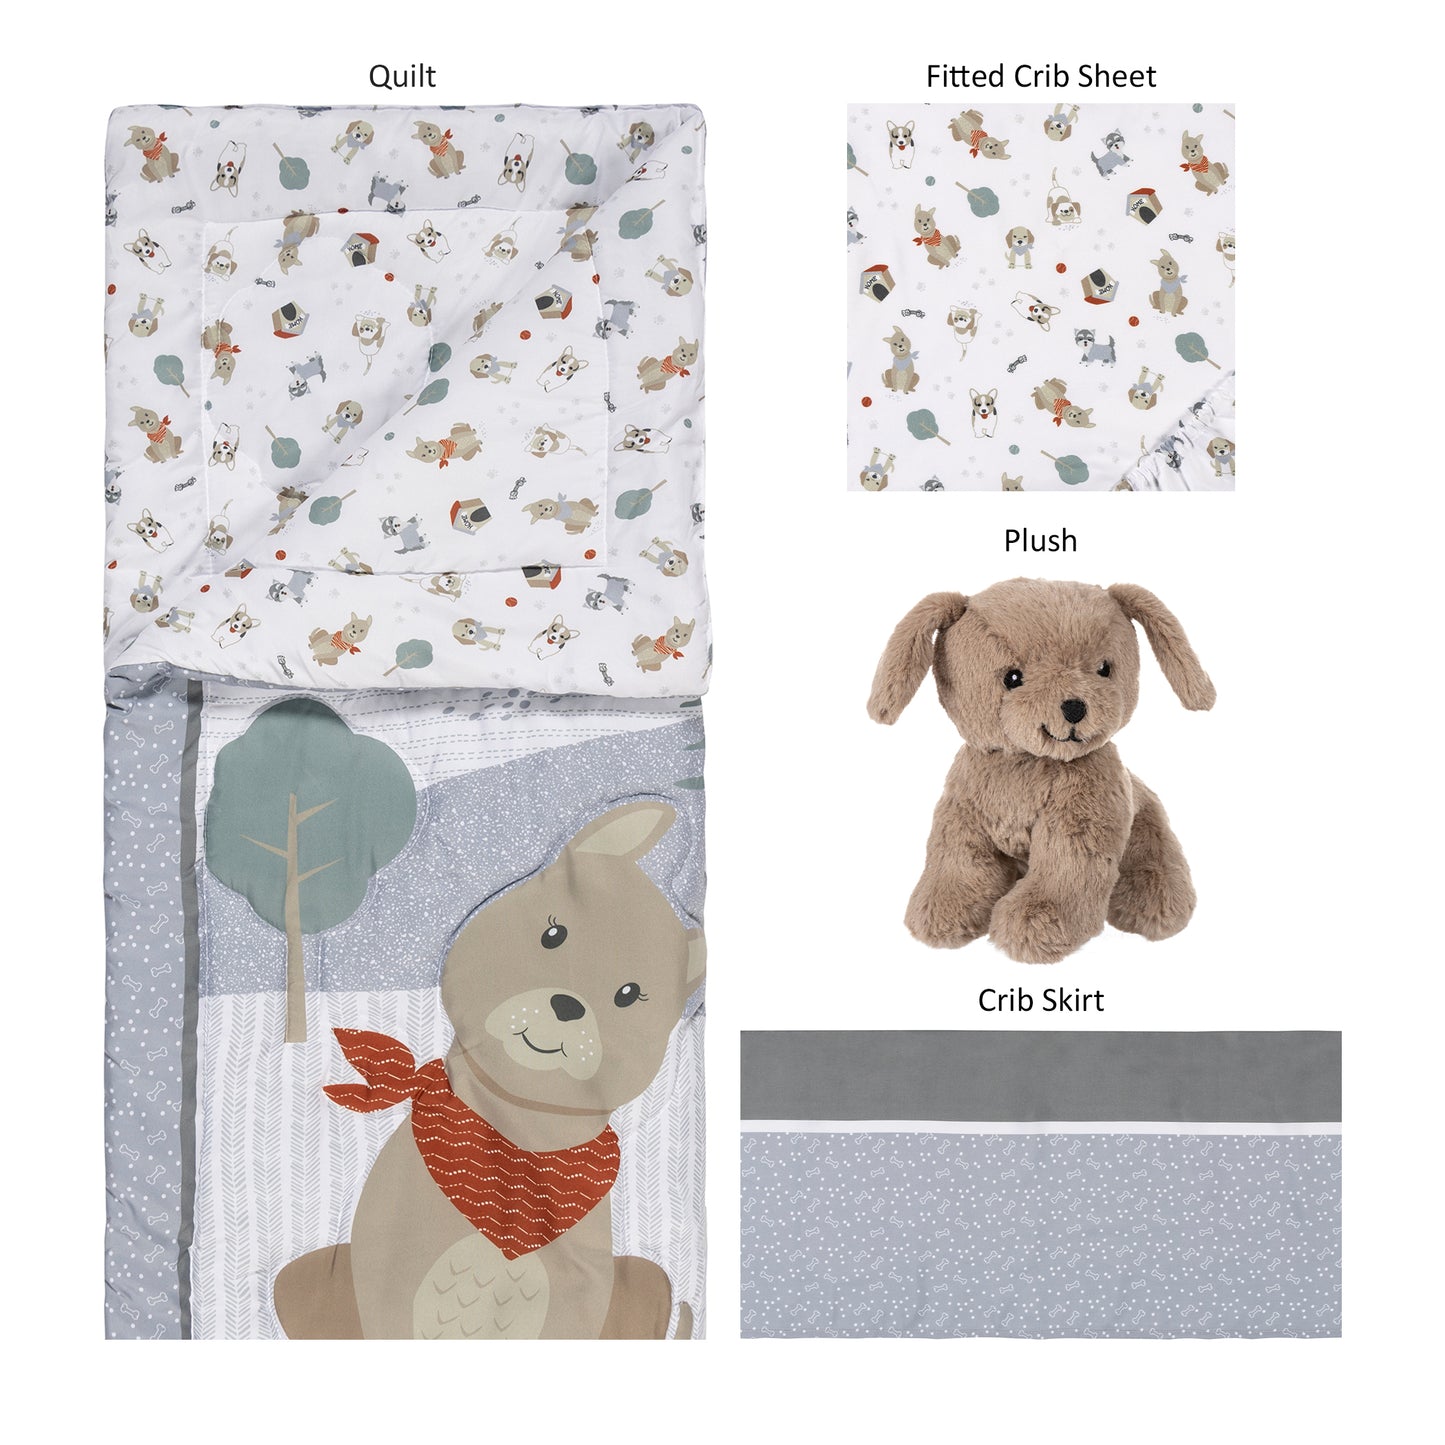  Fur-Ever Friends 4 Piece Crib Bedding Set; pieces laid out includes crib quilt, crib sheet, dog plush toy, and crib skirt